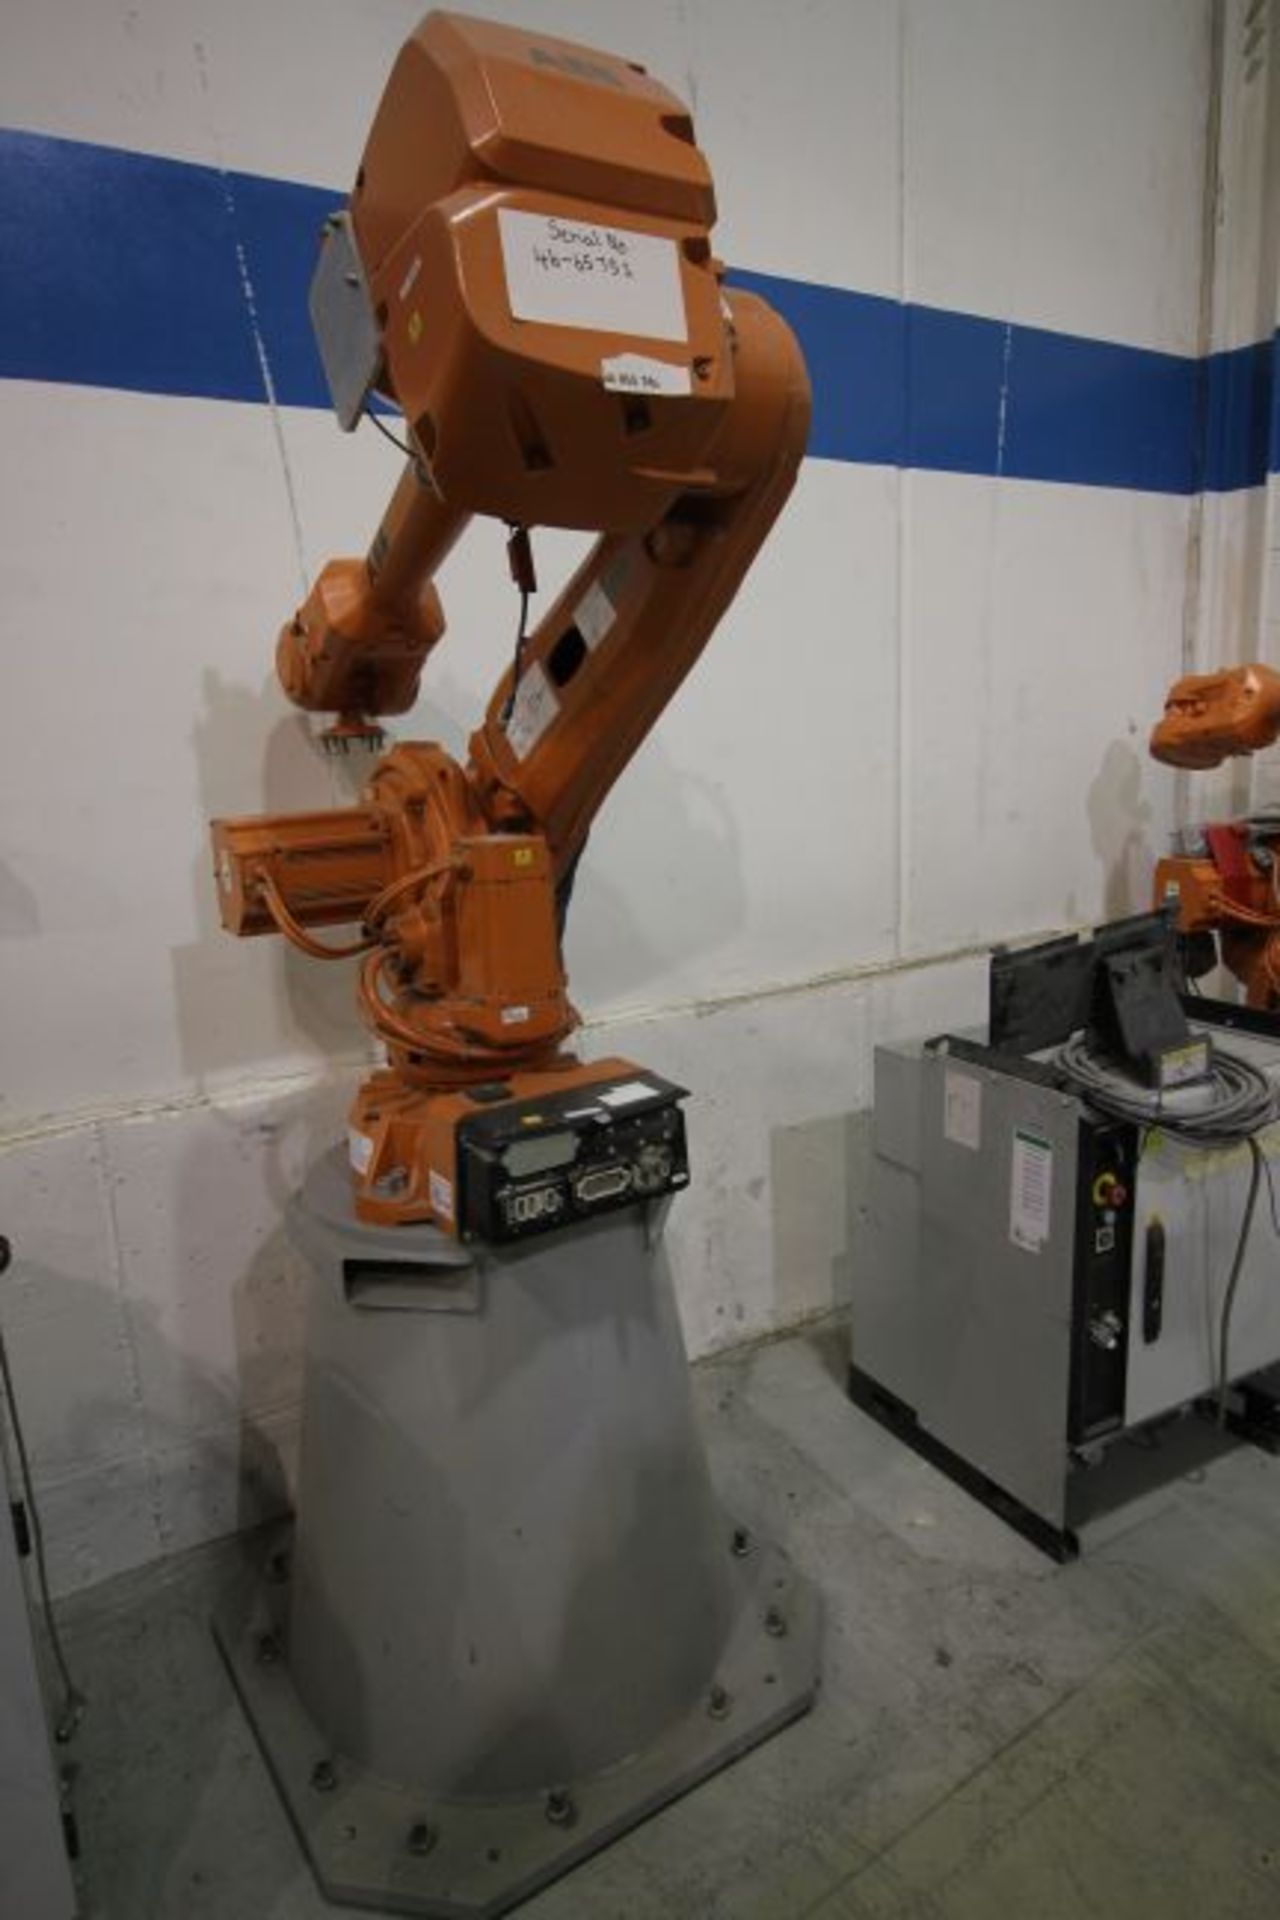 ABB ROBOT IRB 4600 2.05/45KG WITH IRC5 CONTROLS, YEAR 2011, SN 46-65751CABLES, NO PENDANT